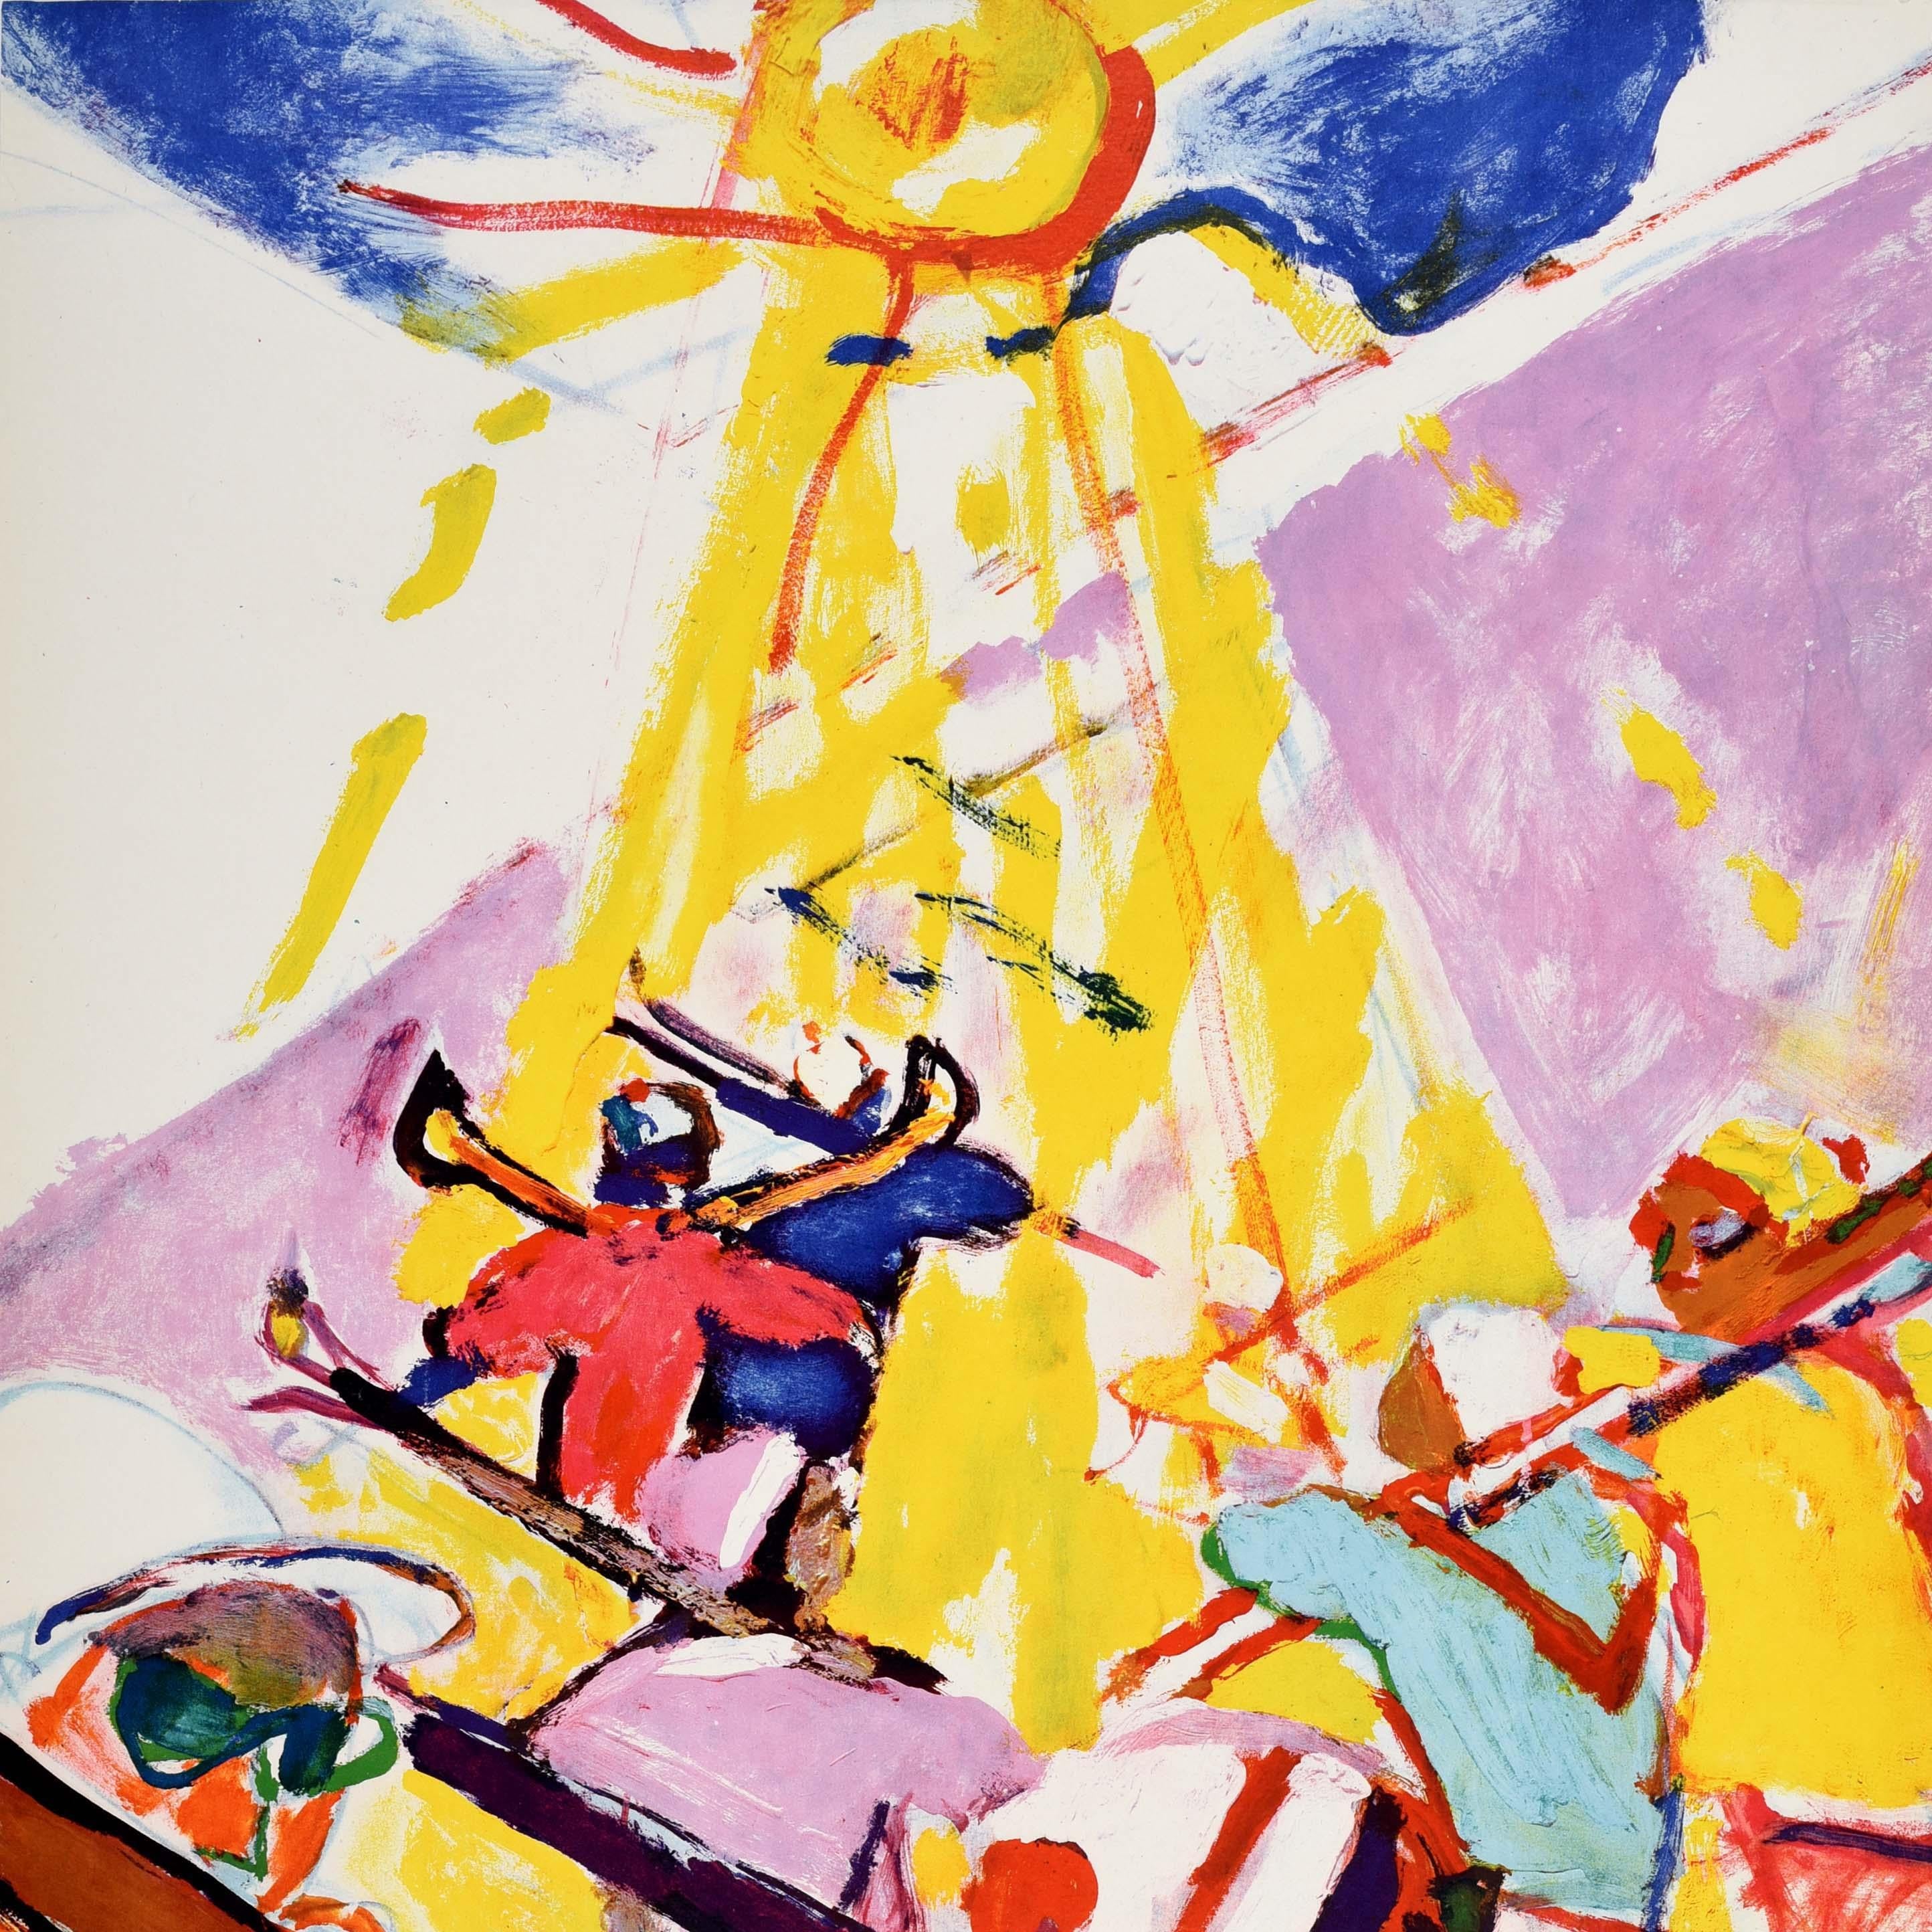 Original vintage winter sport and skiing poster - Sport Au Soleil En Suisse / Sport In The Sun In Switzerland - featuring colourful artwork by the notable artist Hans Falk (1918-2002) of a group of skiers holding their skis over their shoulders as